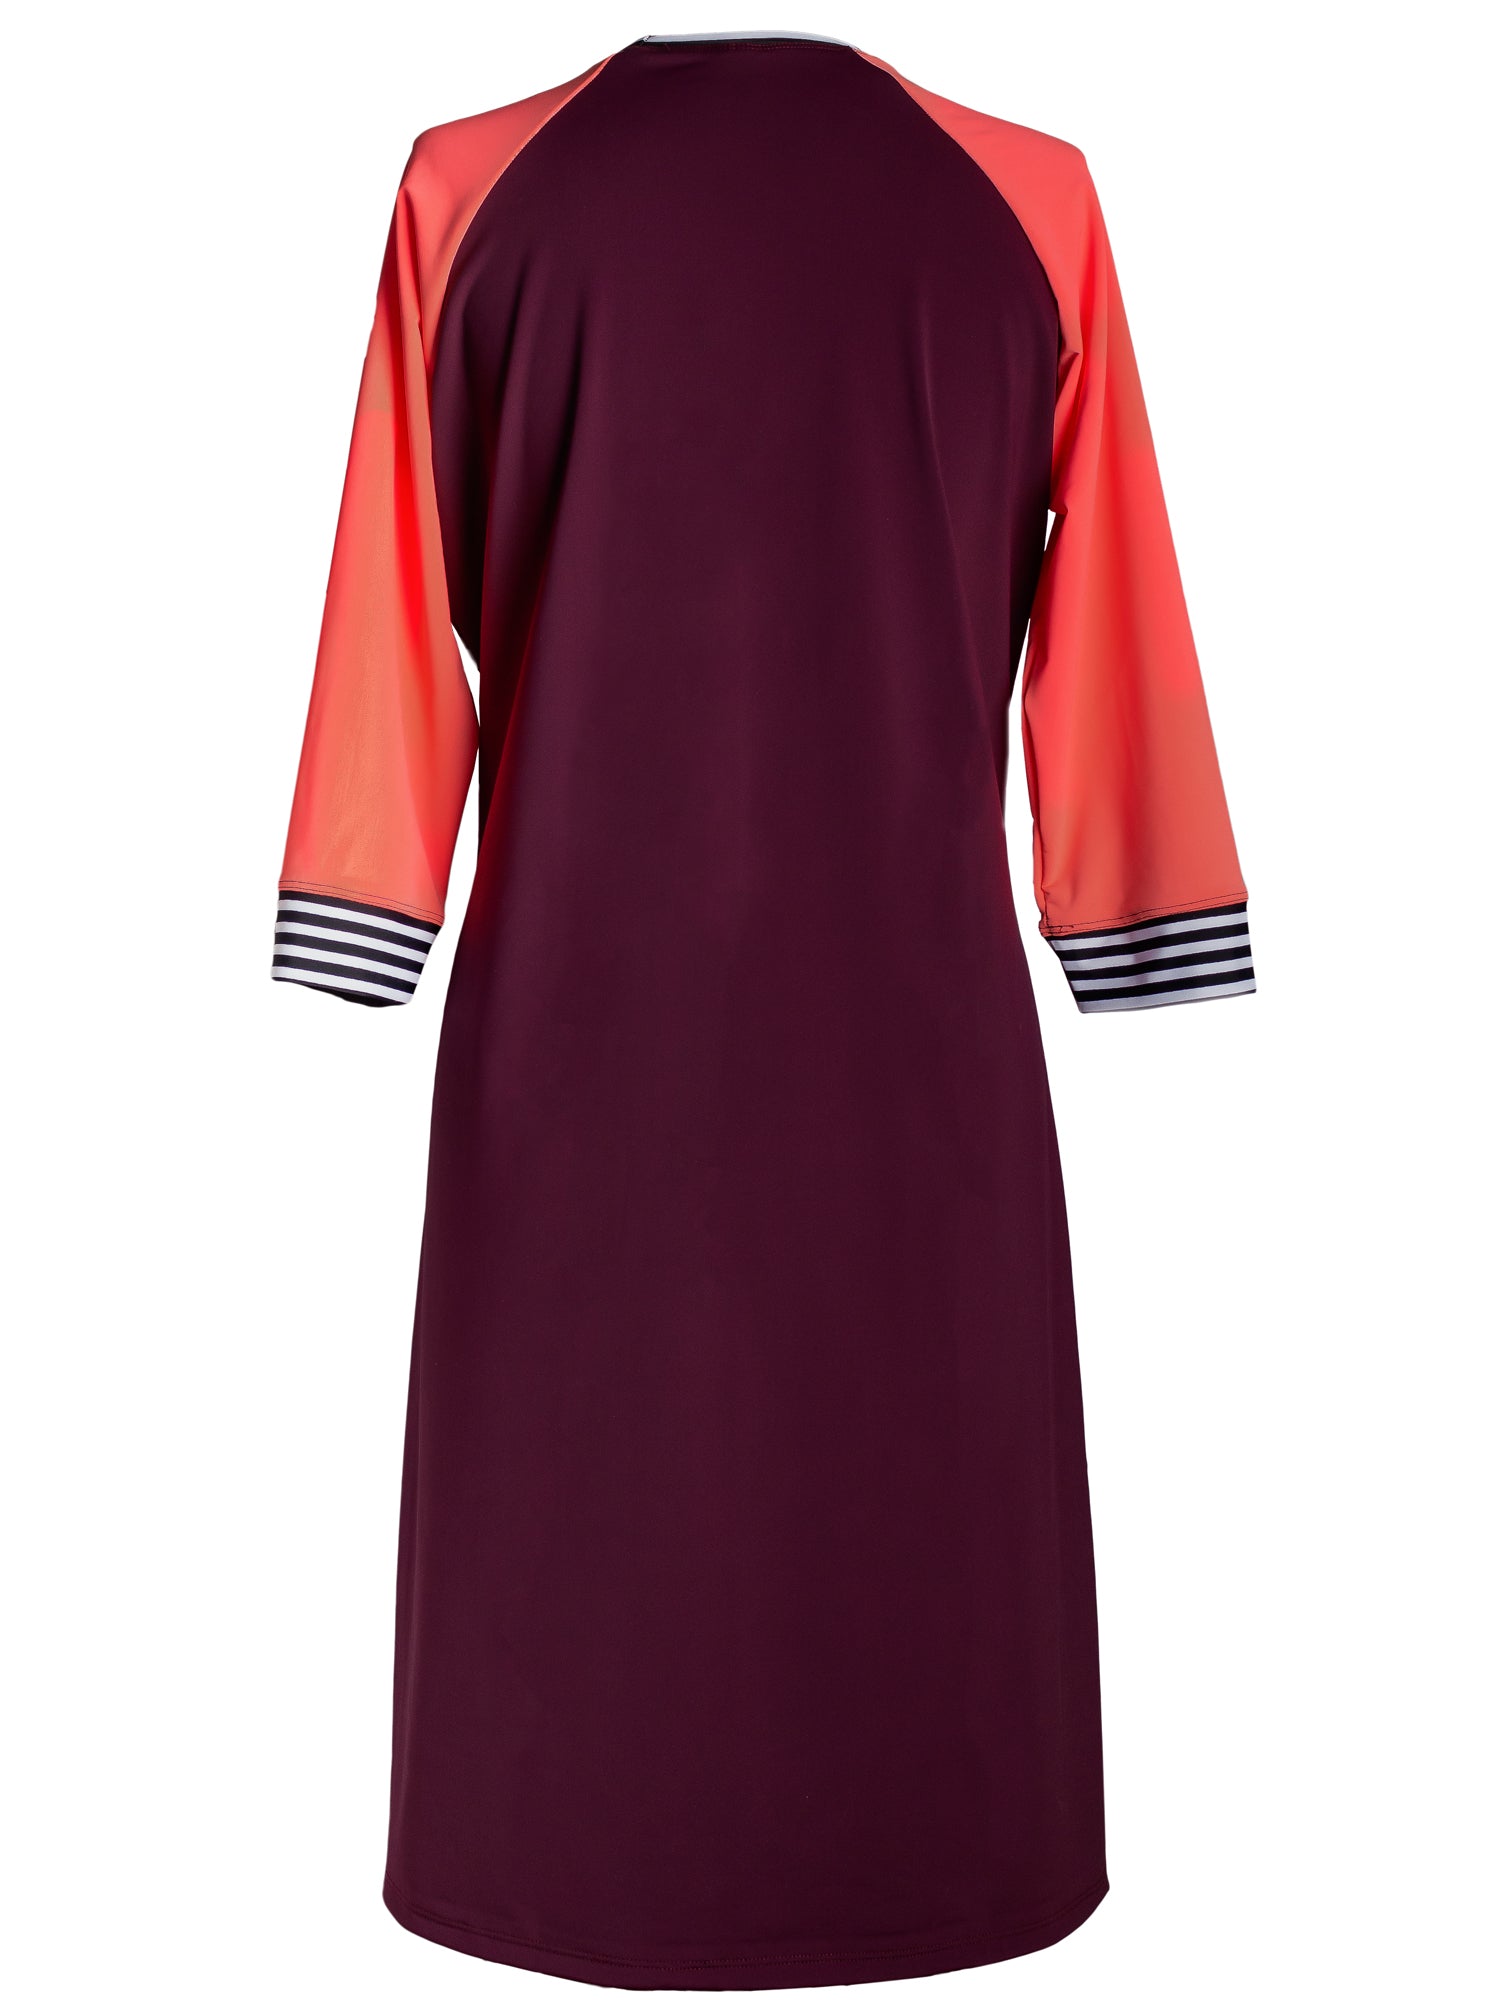 Women's modest swim dress with long sleeves in solid purple and pink long sleeves.